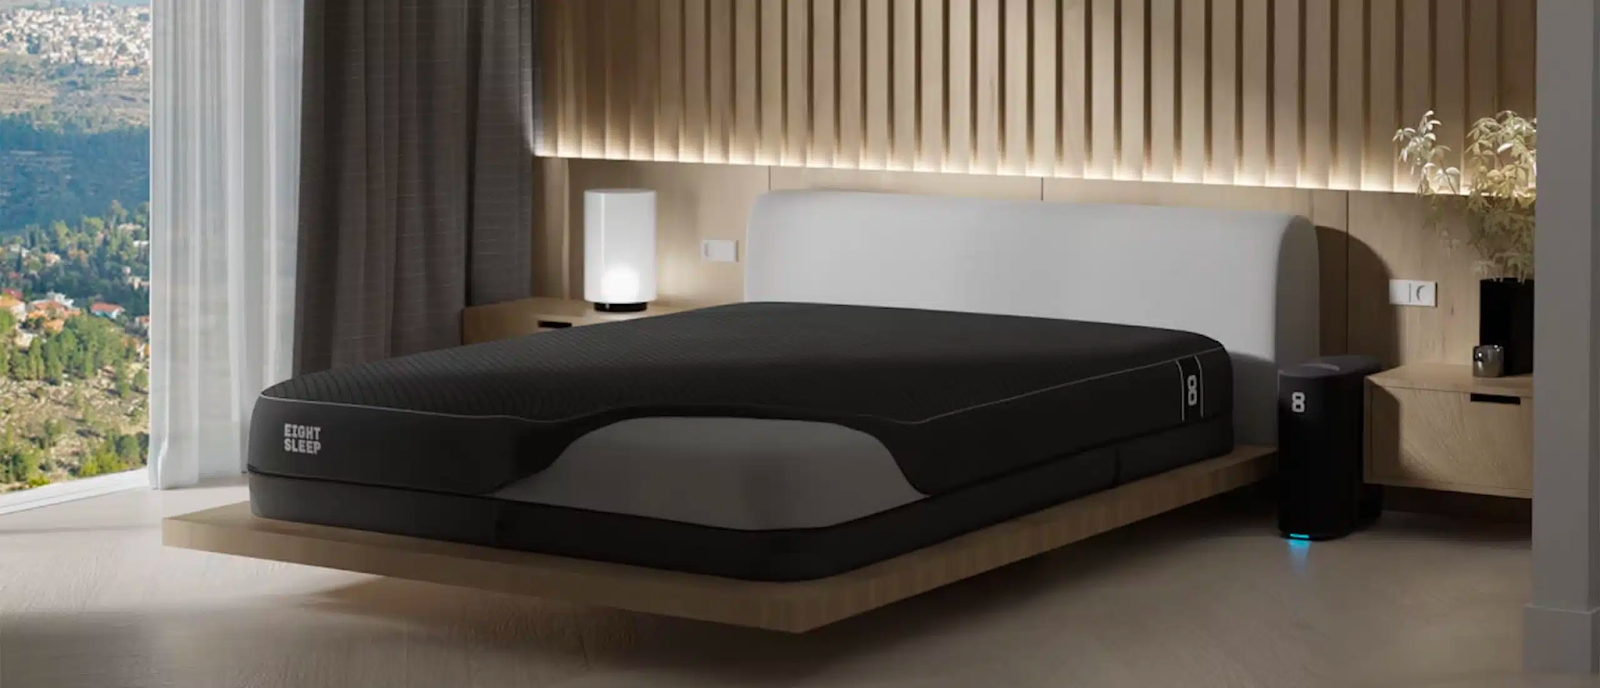 A modern bedroom with an Eight Sleep pod cover on its bed.